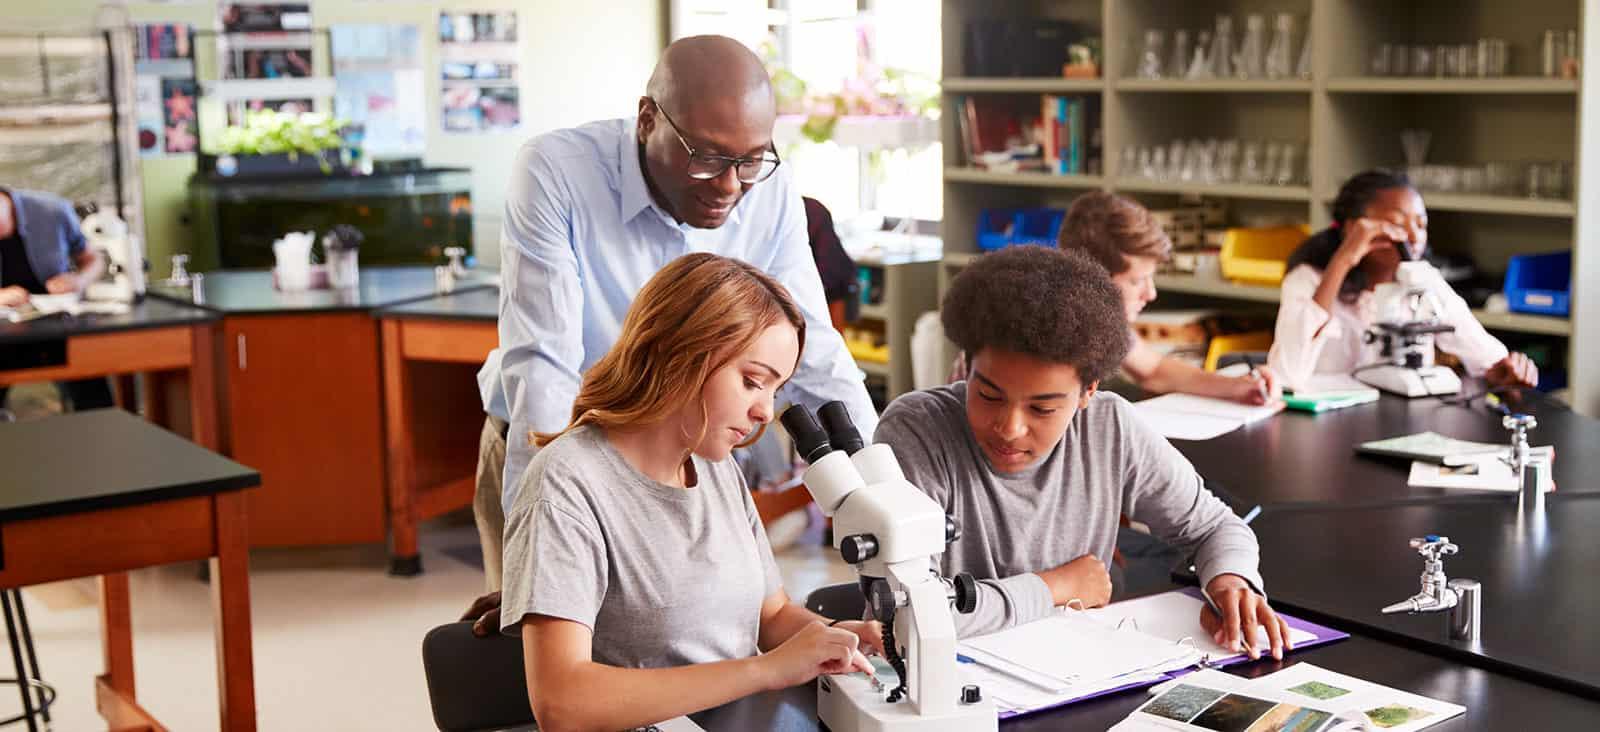 High School Students With Tutor Using Microscope In Biology Class